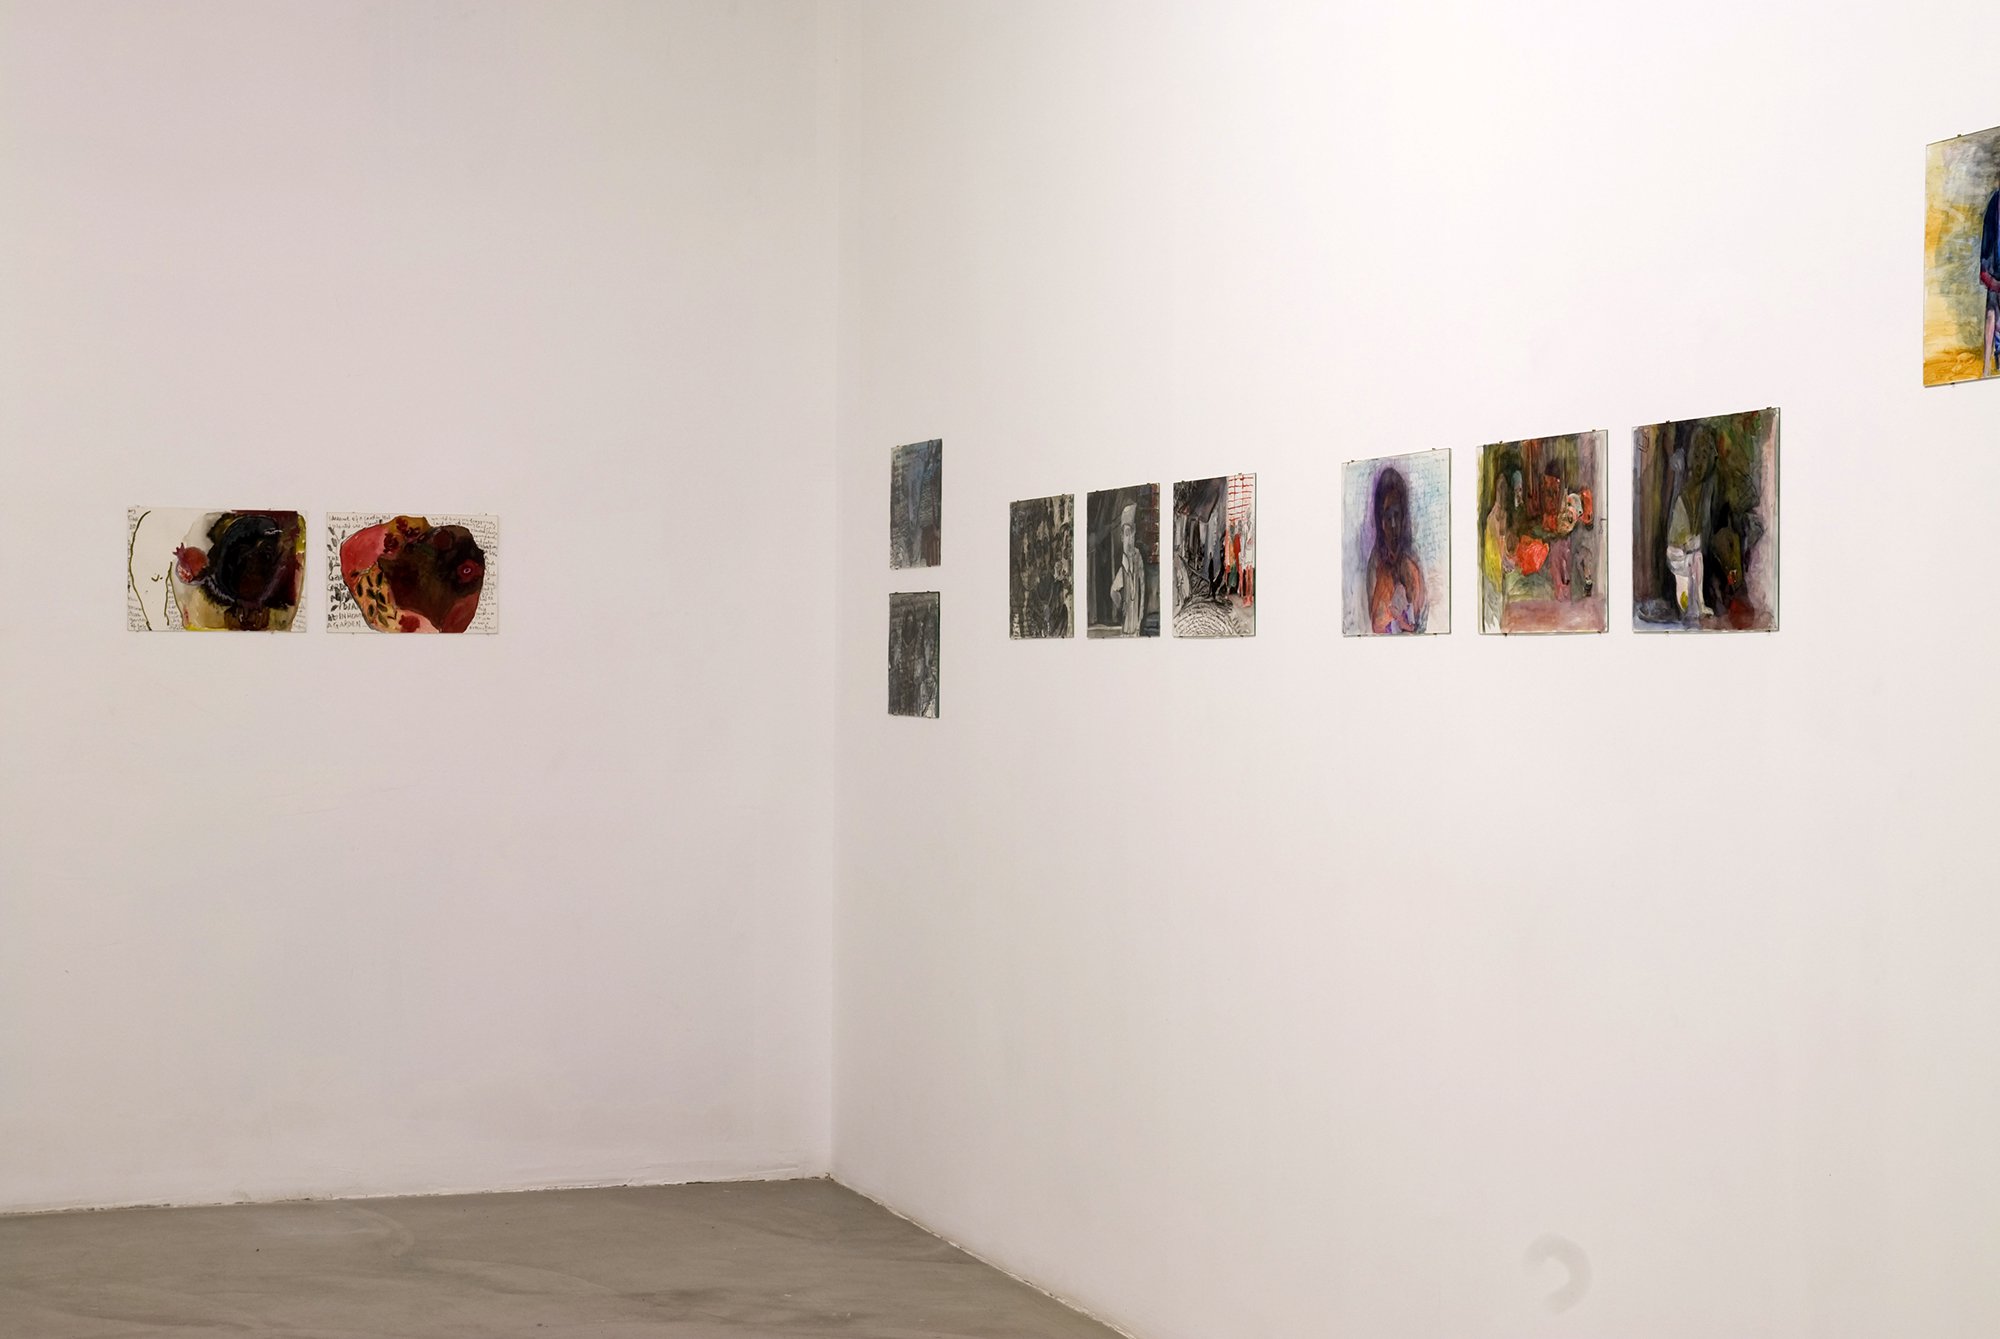 Installation view, Hand in Hand, Rodeo, Istanbul, 2009 – 2010